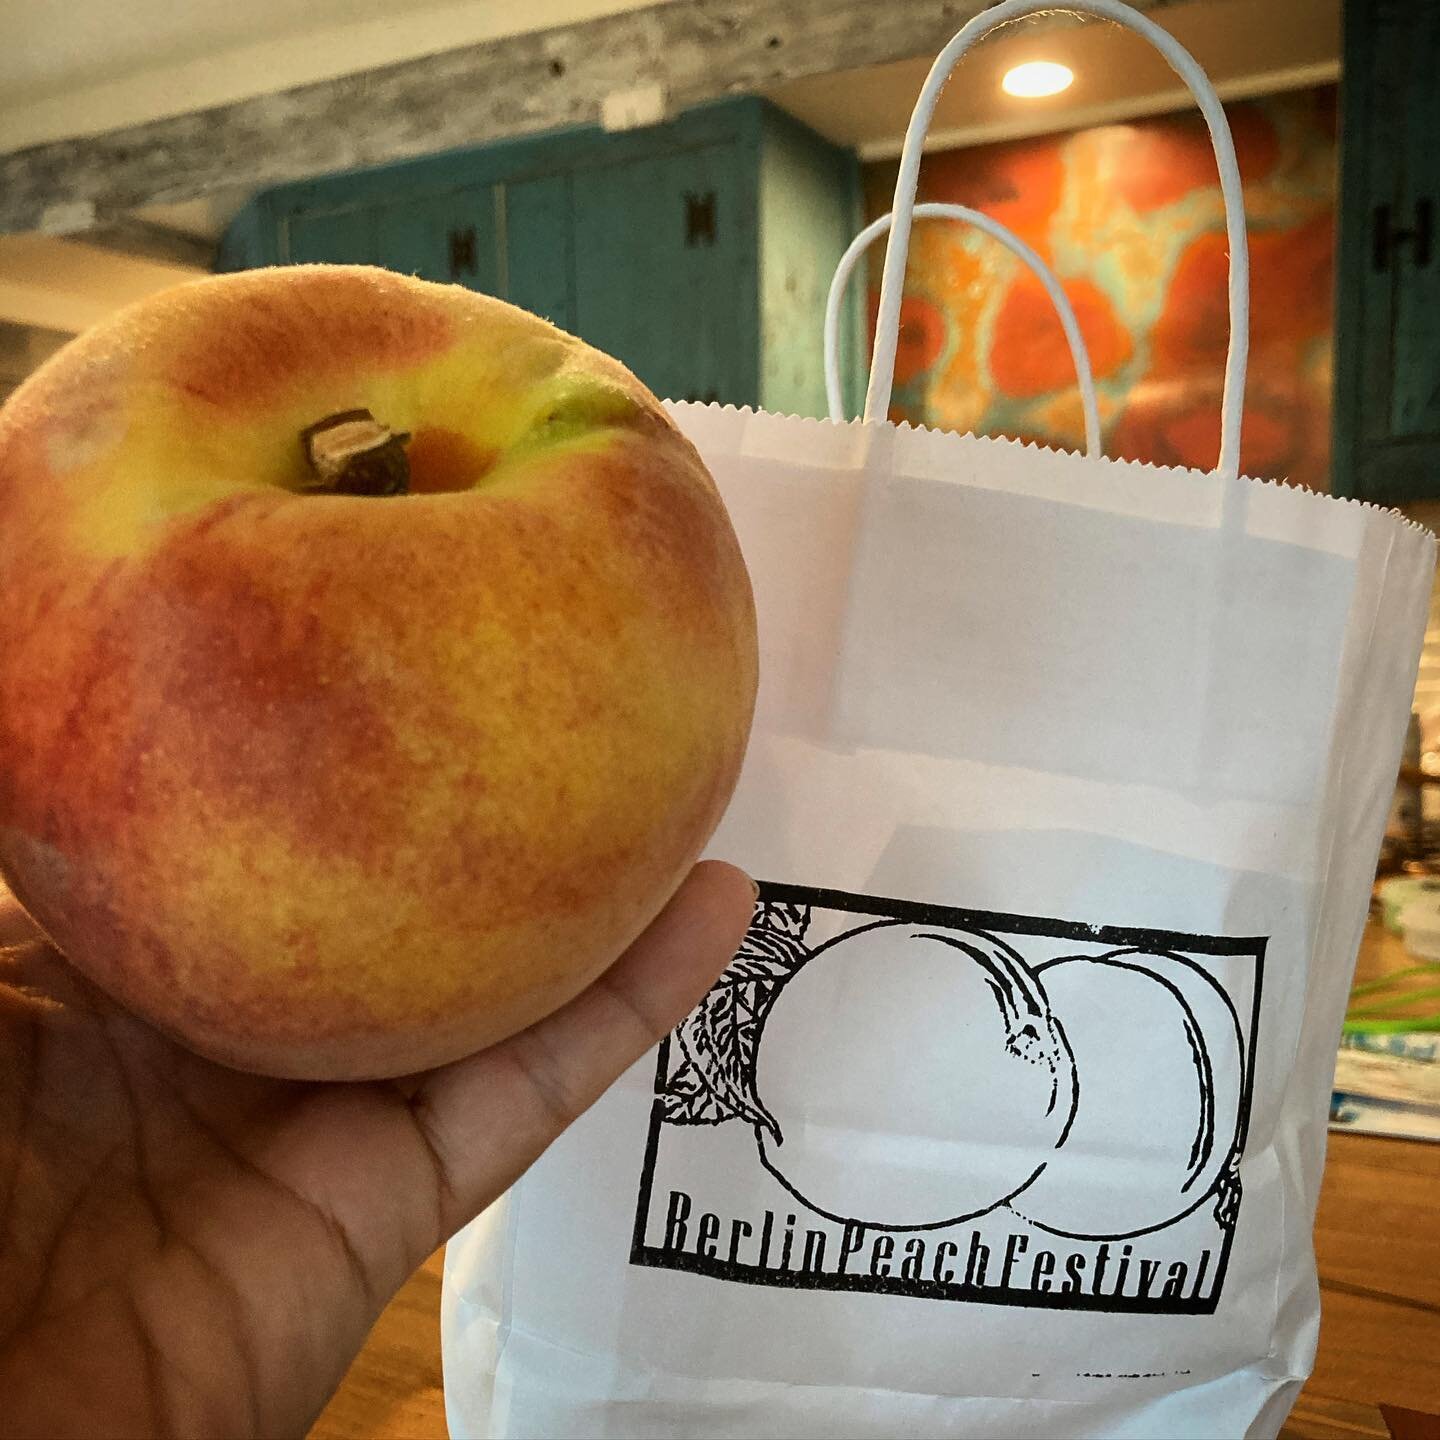 🍑 It&rsquo;s that day of the year - go get some! 🍑 😋 
#peachfestival #berlinmd